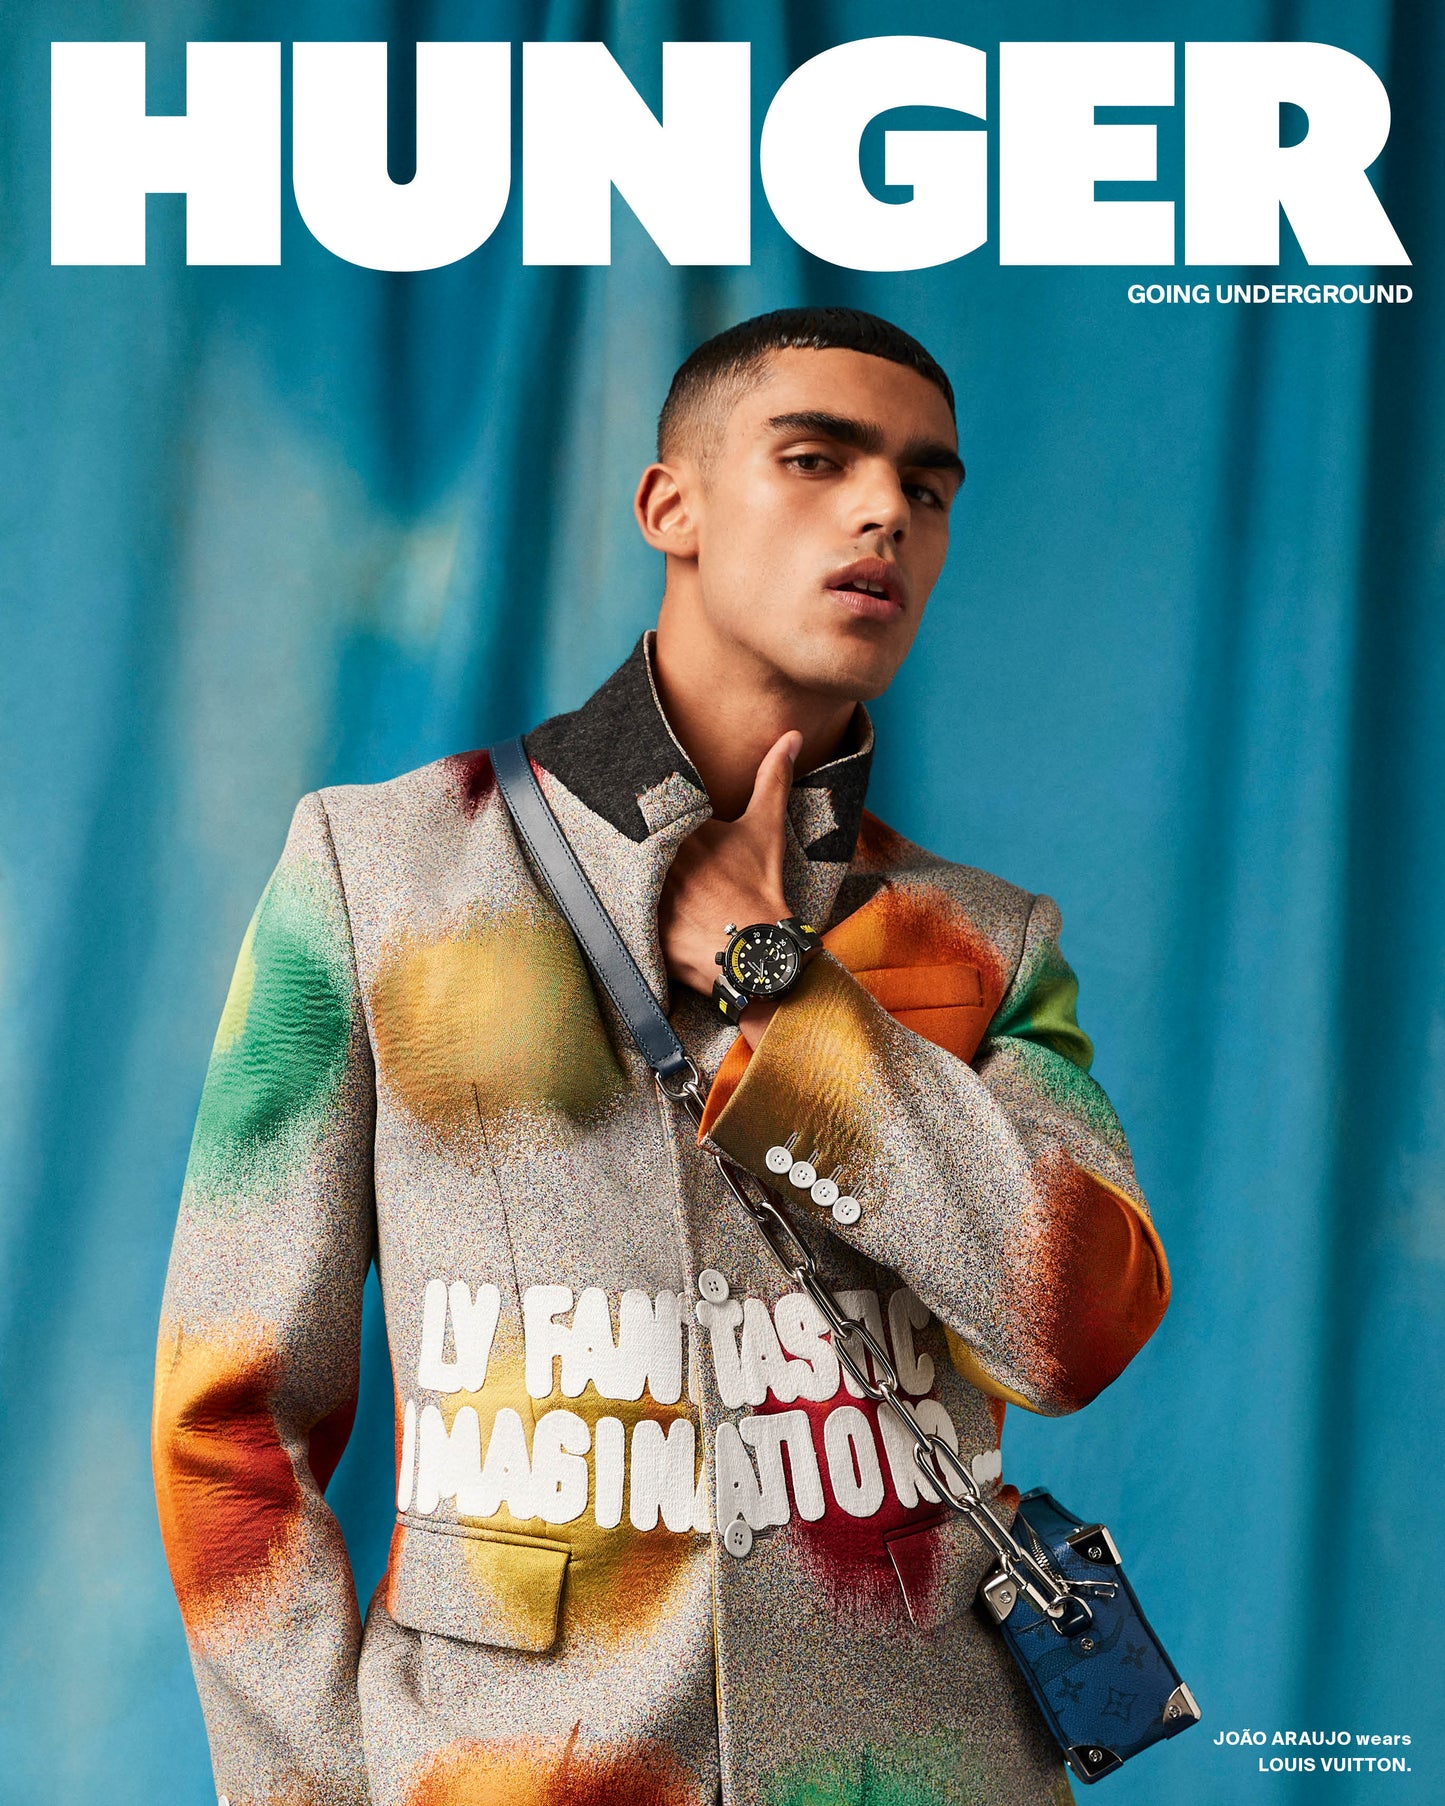 João Araujo covers the Going Underground issue in Louis Vuitton